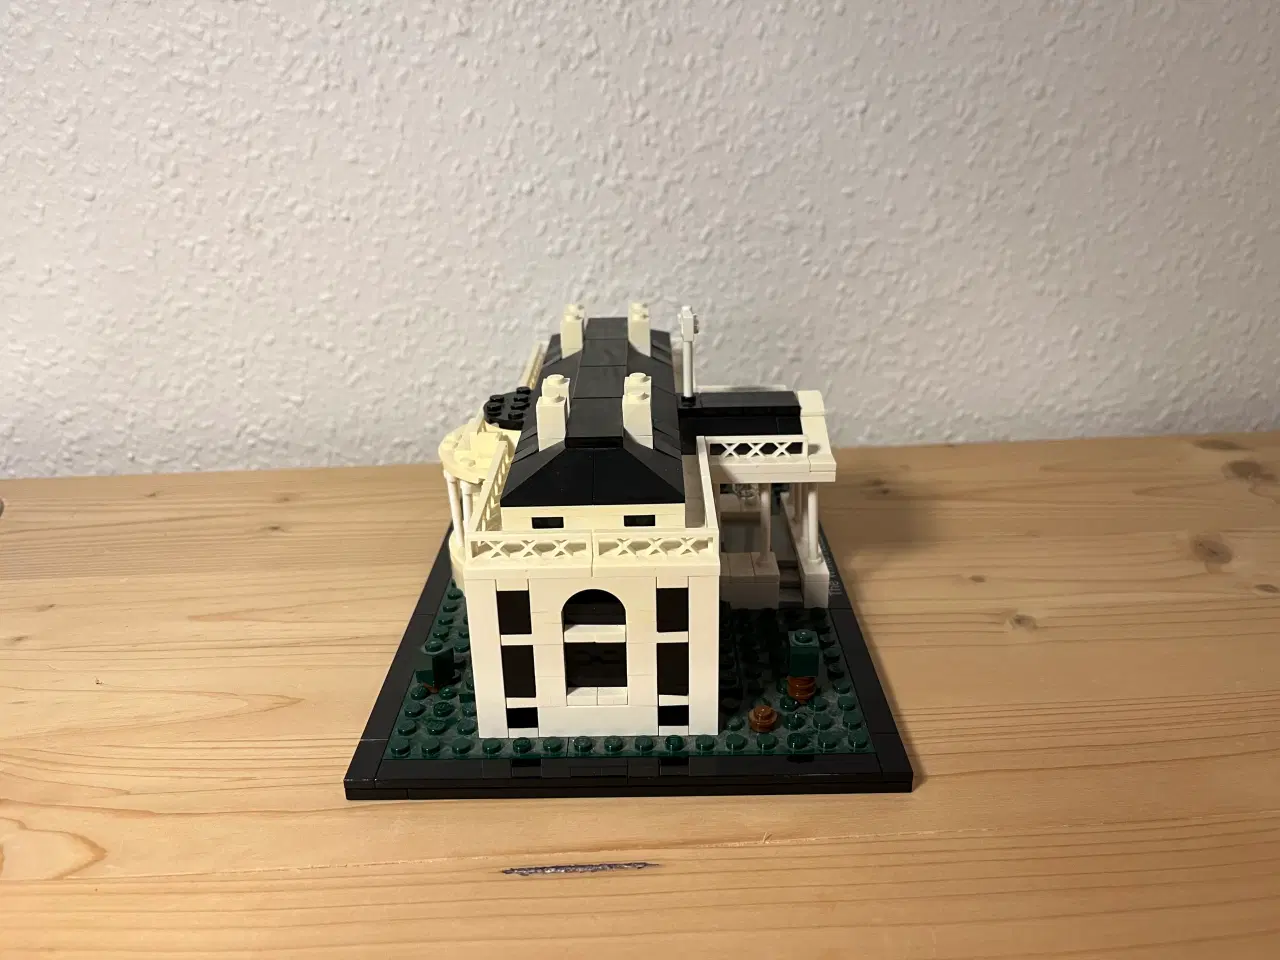 Billede 2 - Lego architecture - The White House // 21006